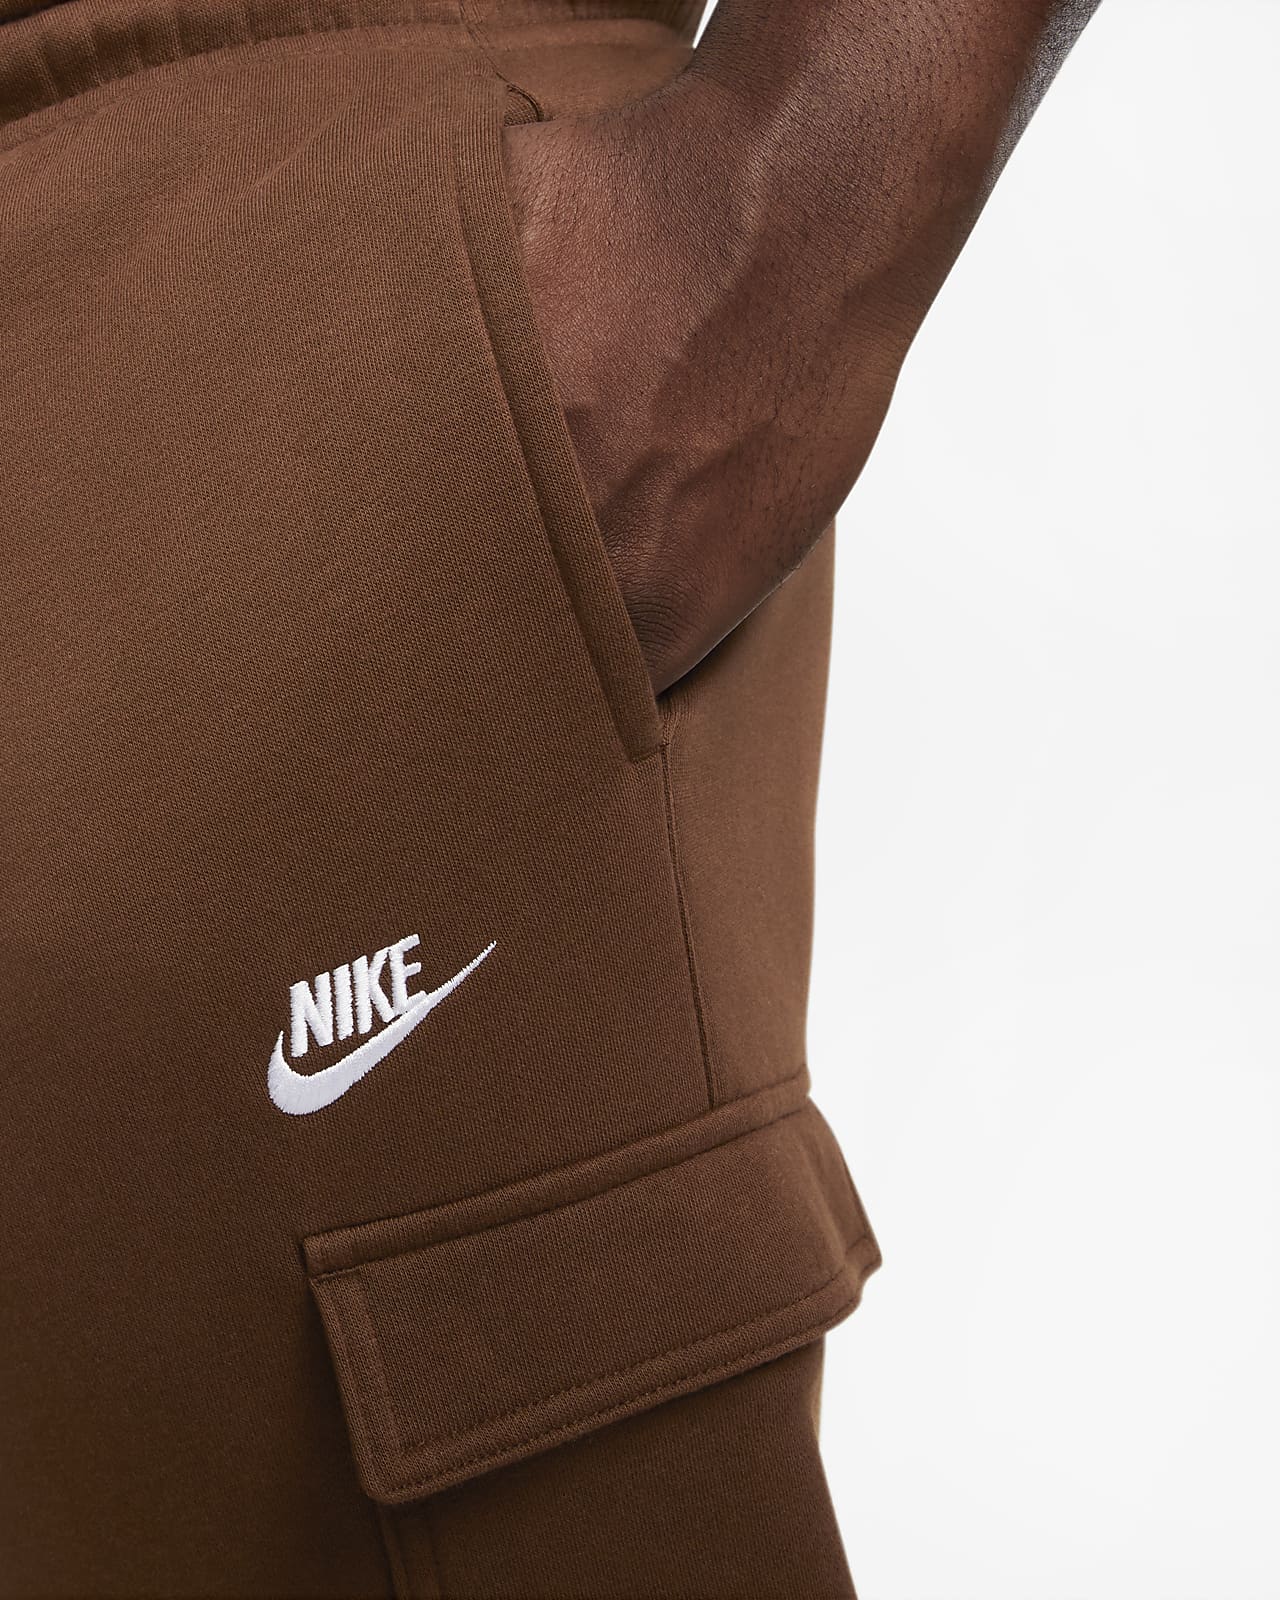 Buy Nike Club Fleece Cargo Joggers from the Laura Ashley online shop